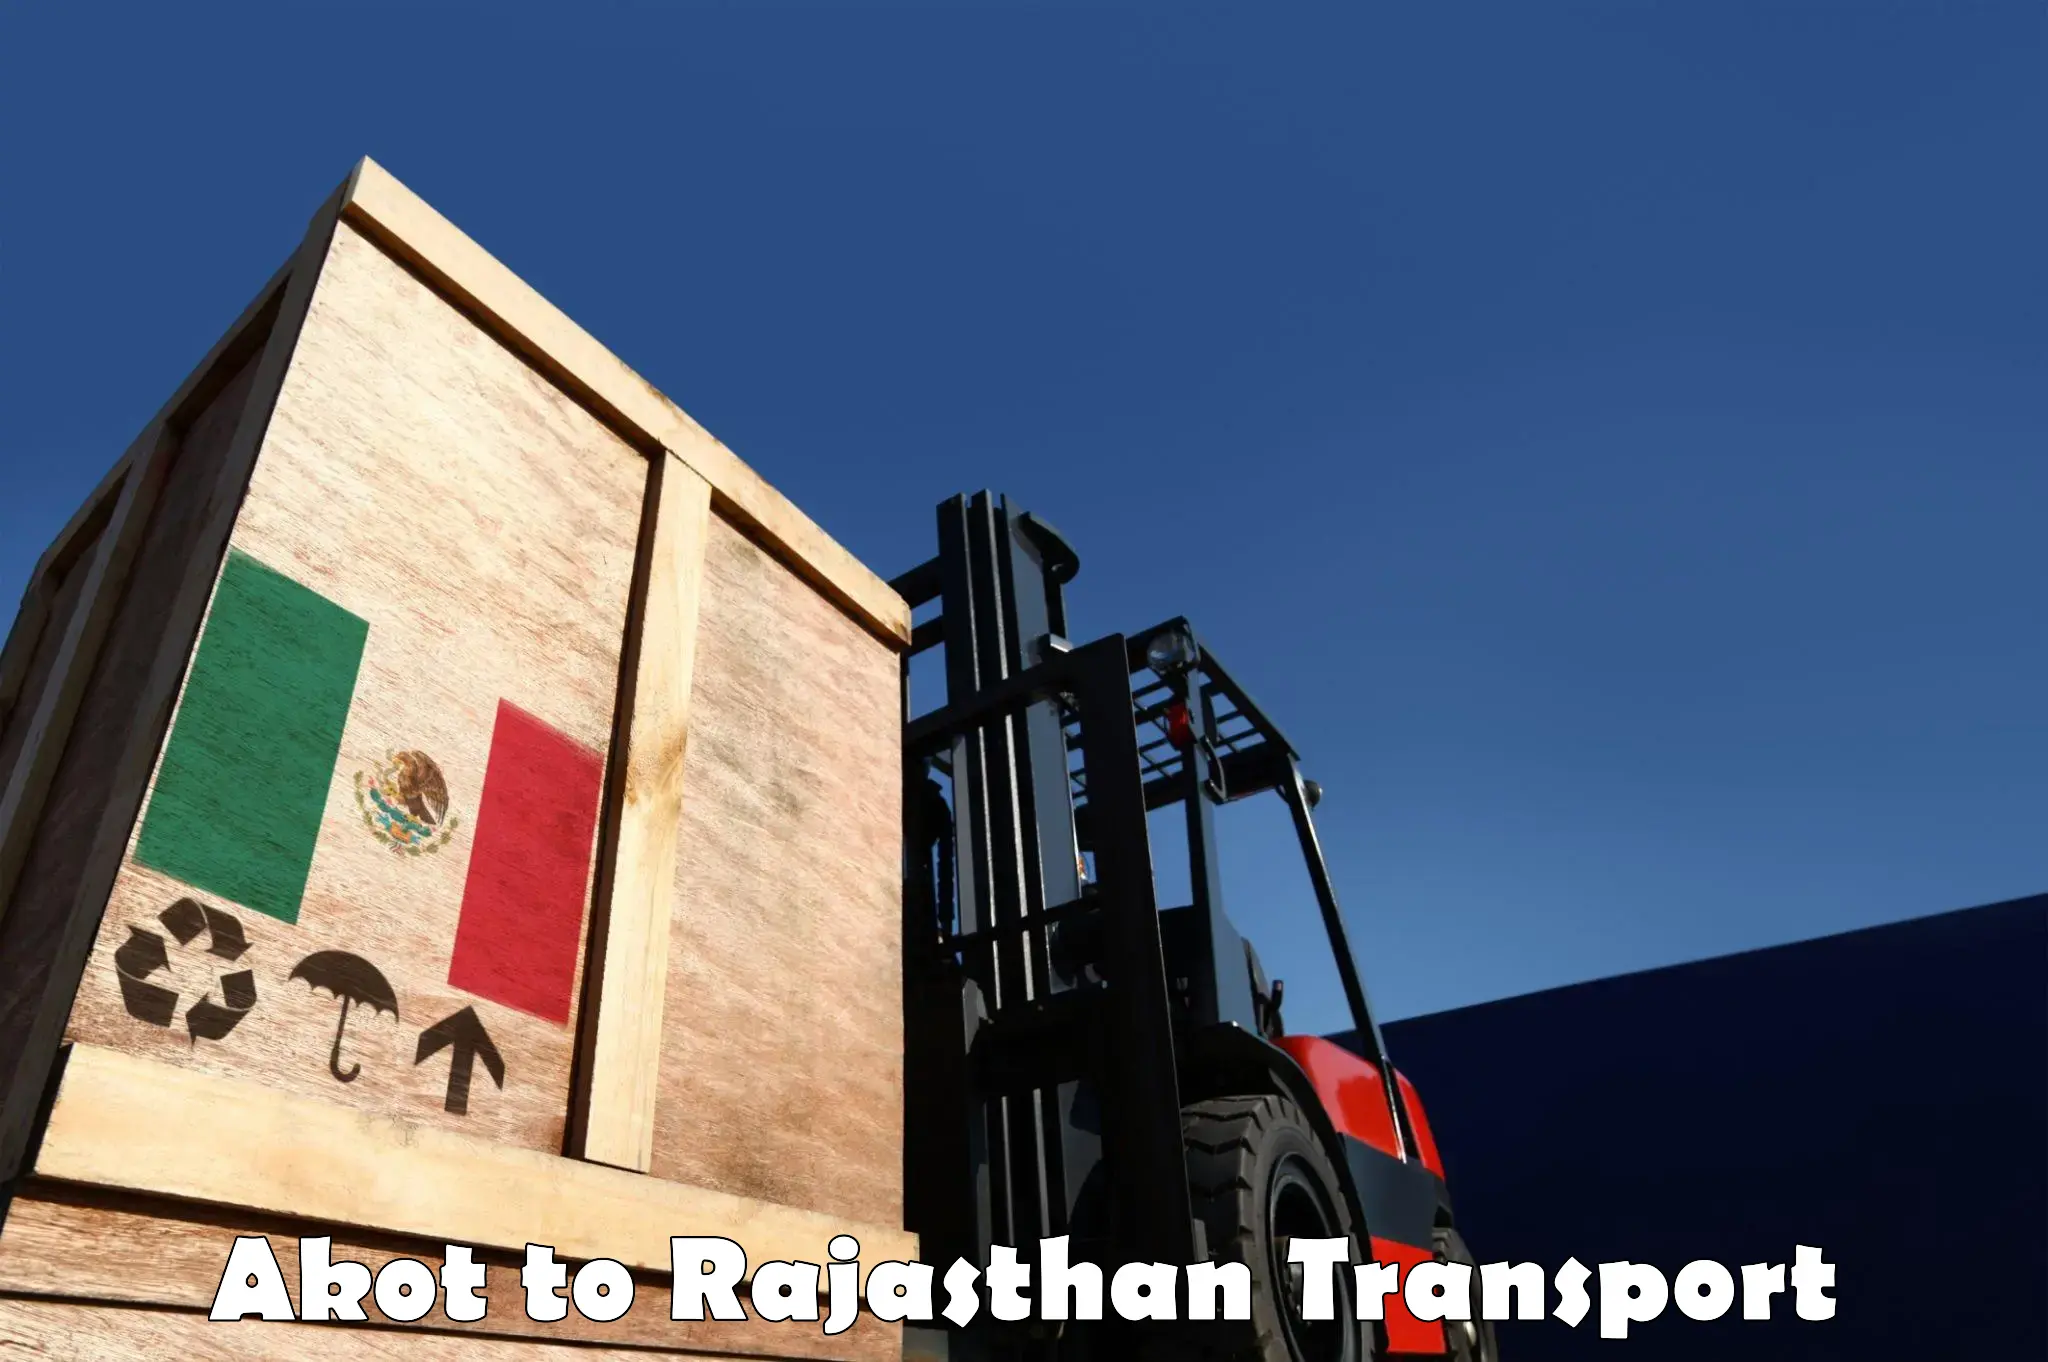 Transportation services in Akot to Rajasthan